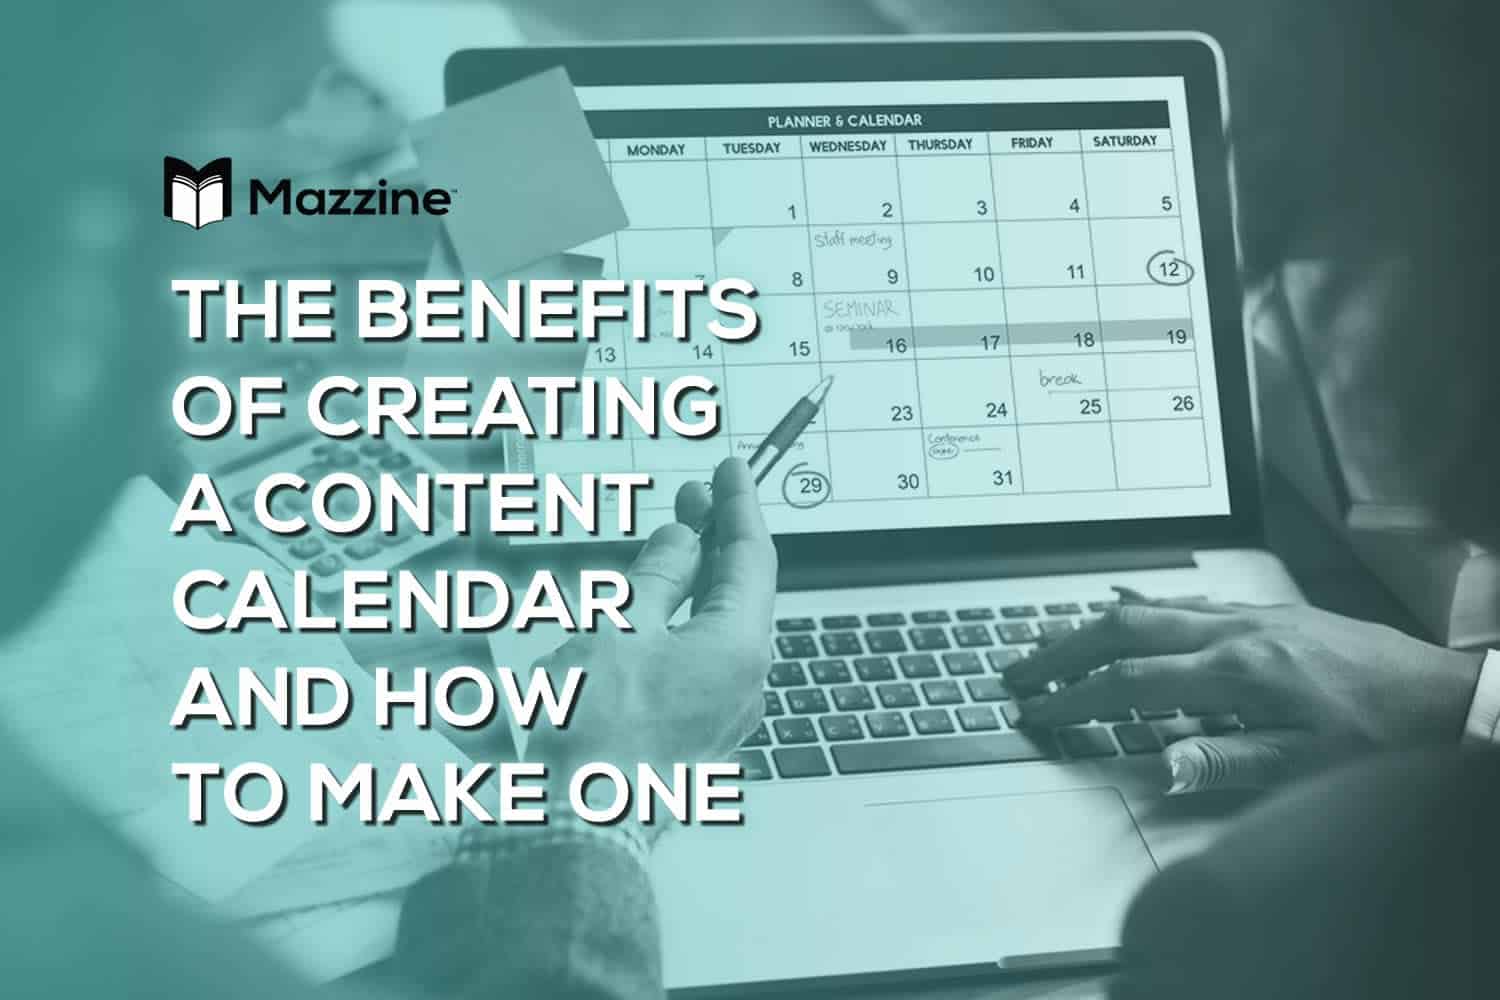 The Benefits of Creating a Content Calendar and How to Make One